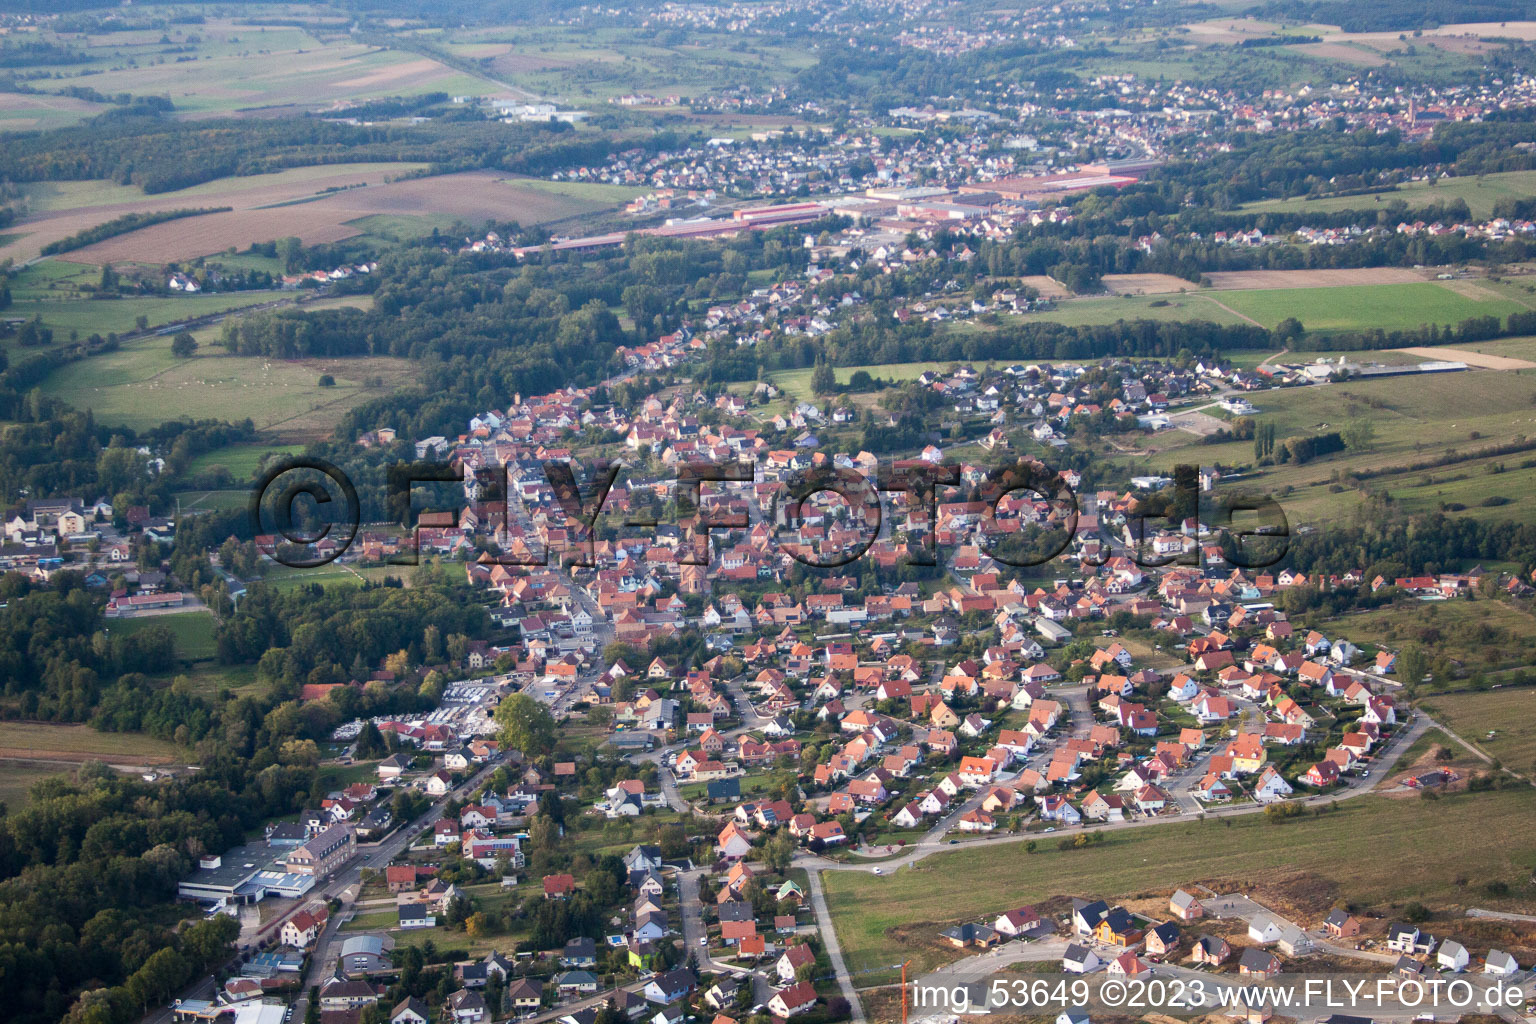 Griesbach in the state Bas-Rhin, France from a drone